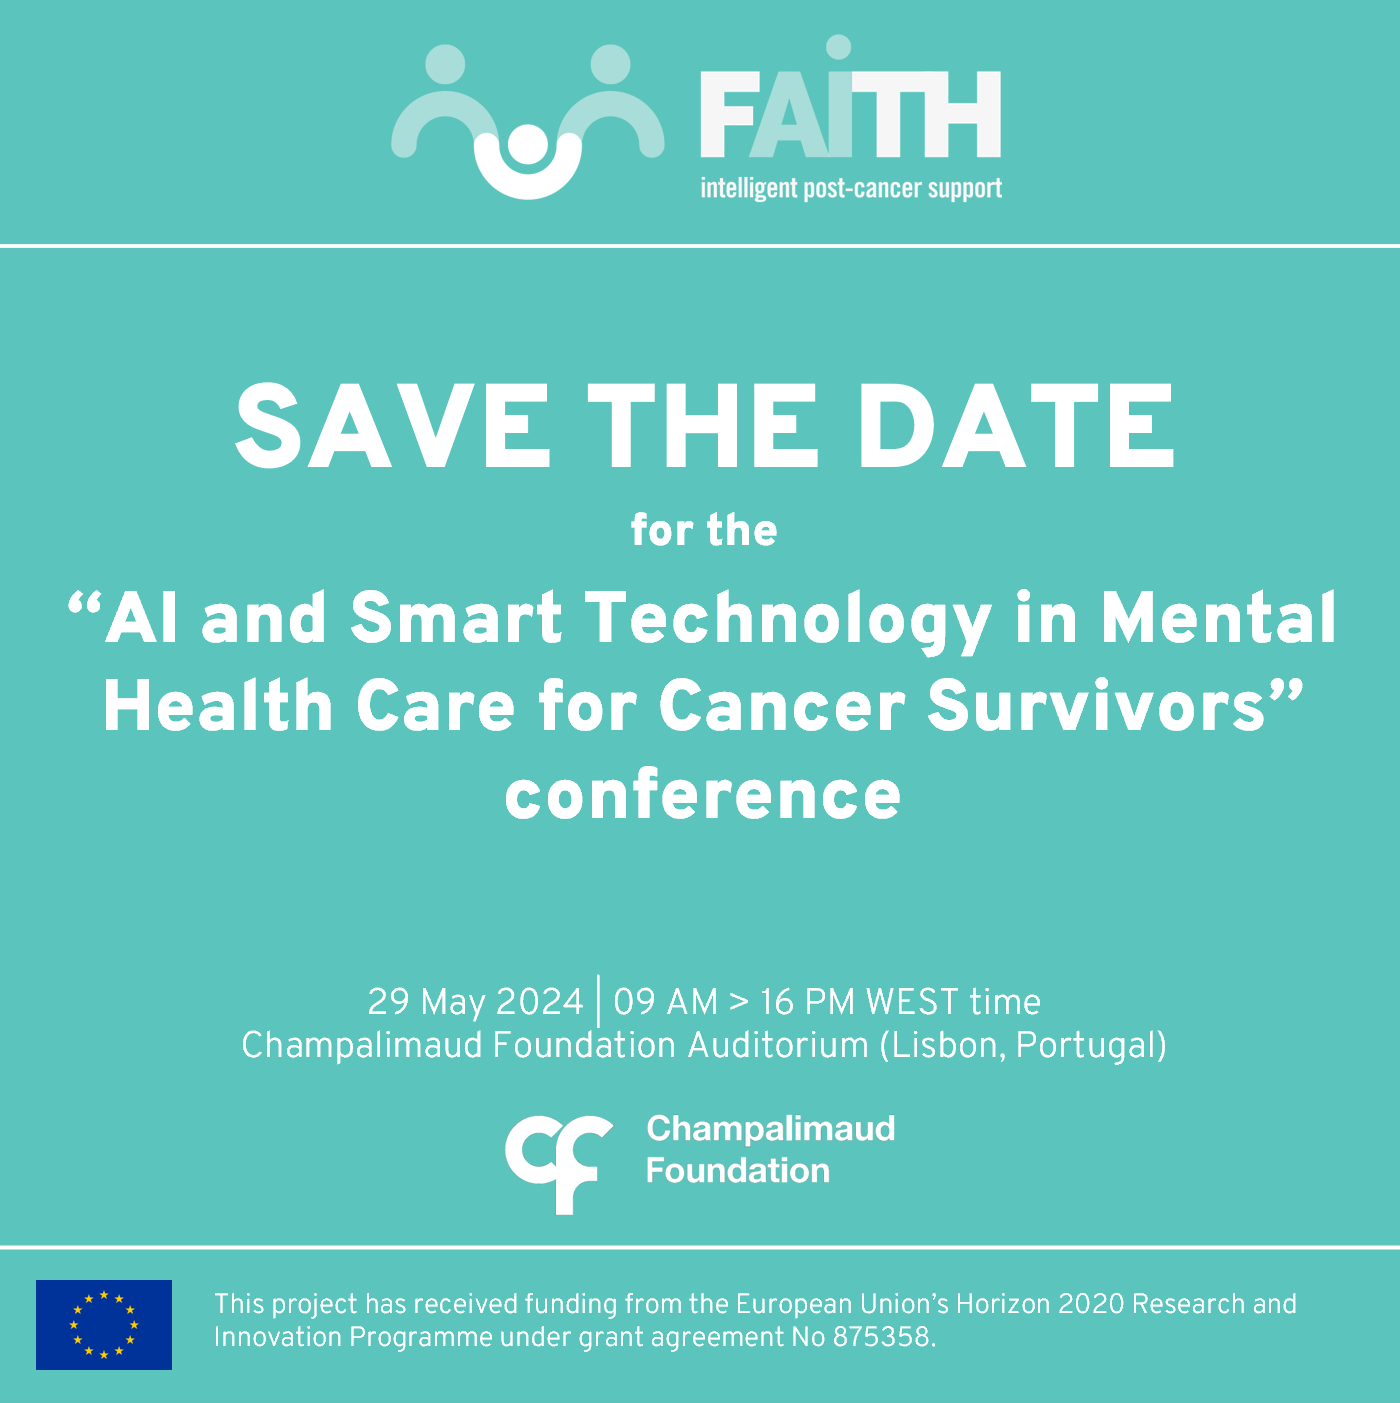 Conference: AI and Smart Technology in Mental Health Care for Cancer Survivors